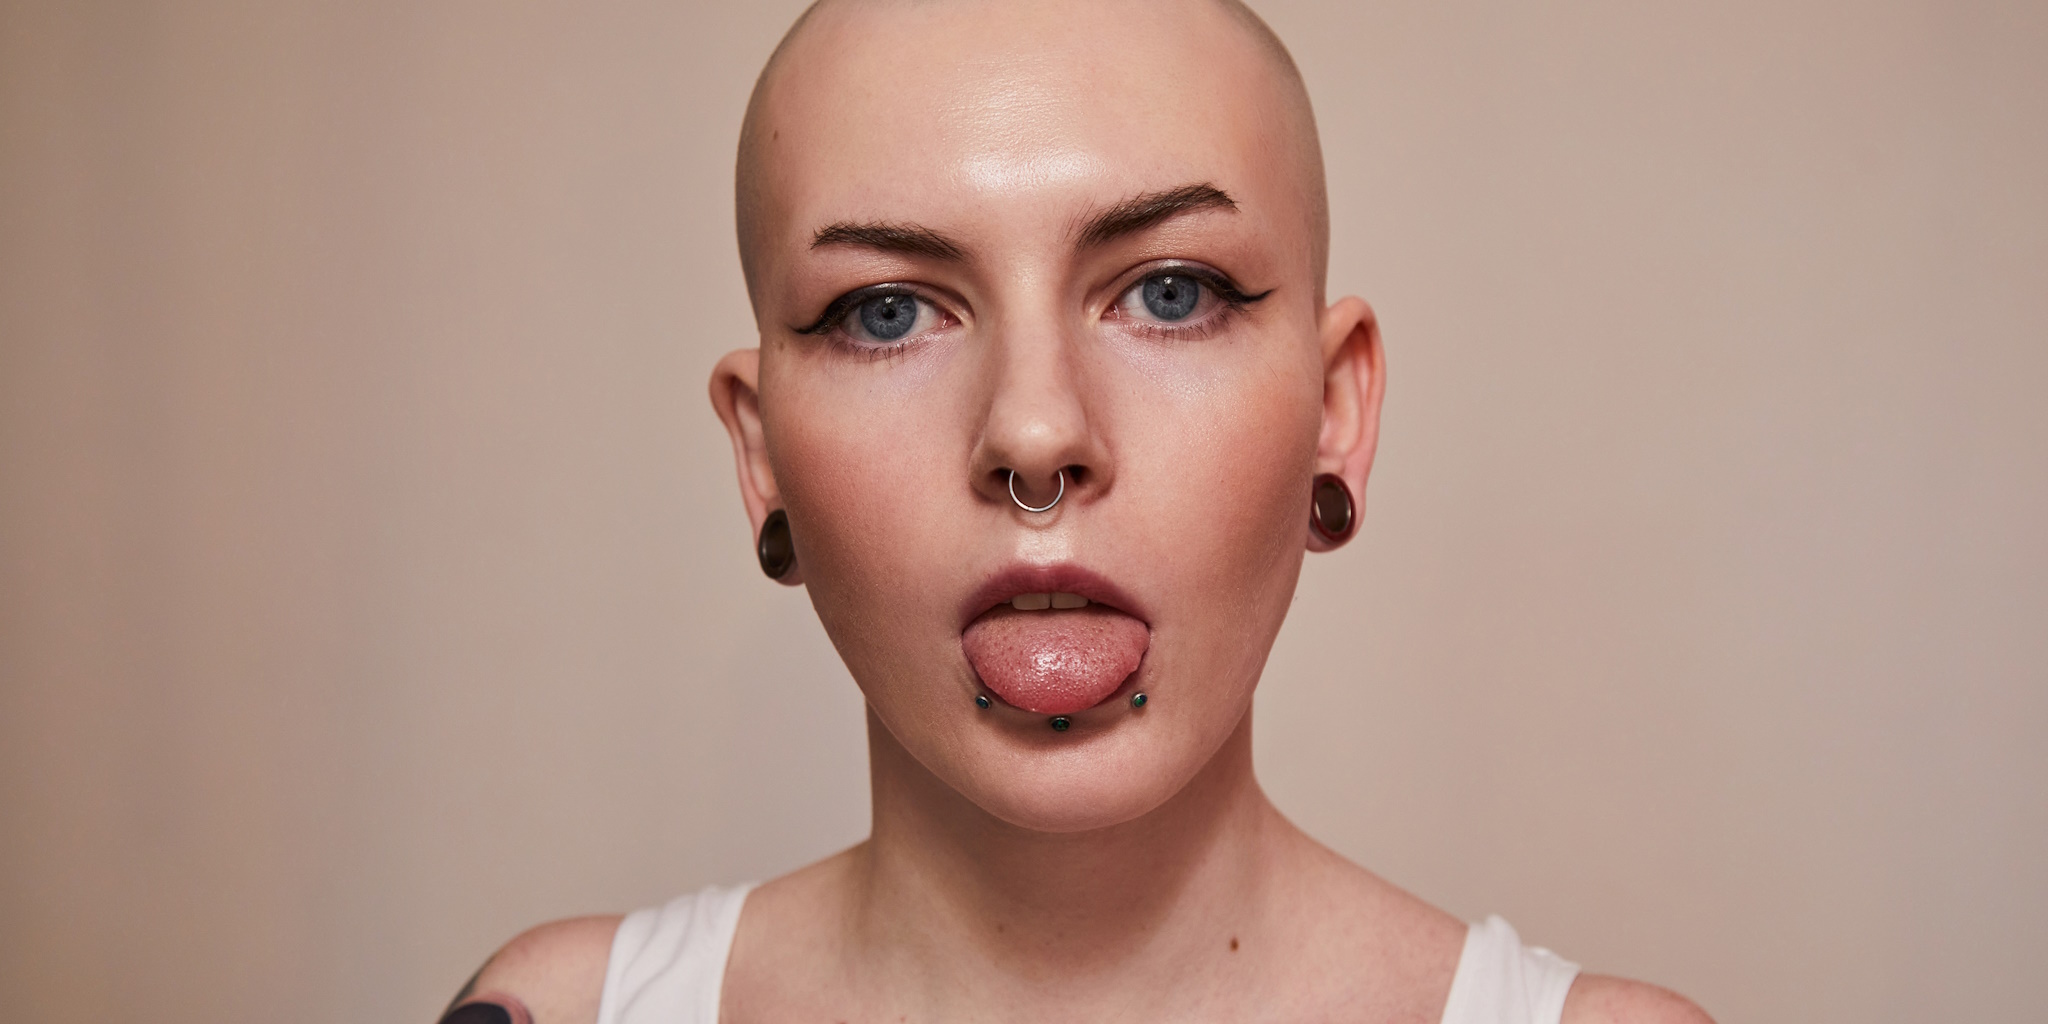 A person displaying multiple face piercings.